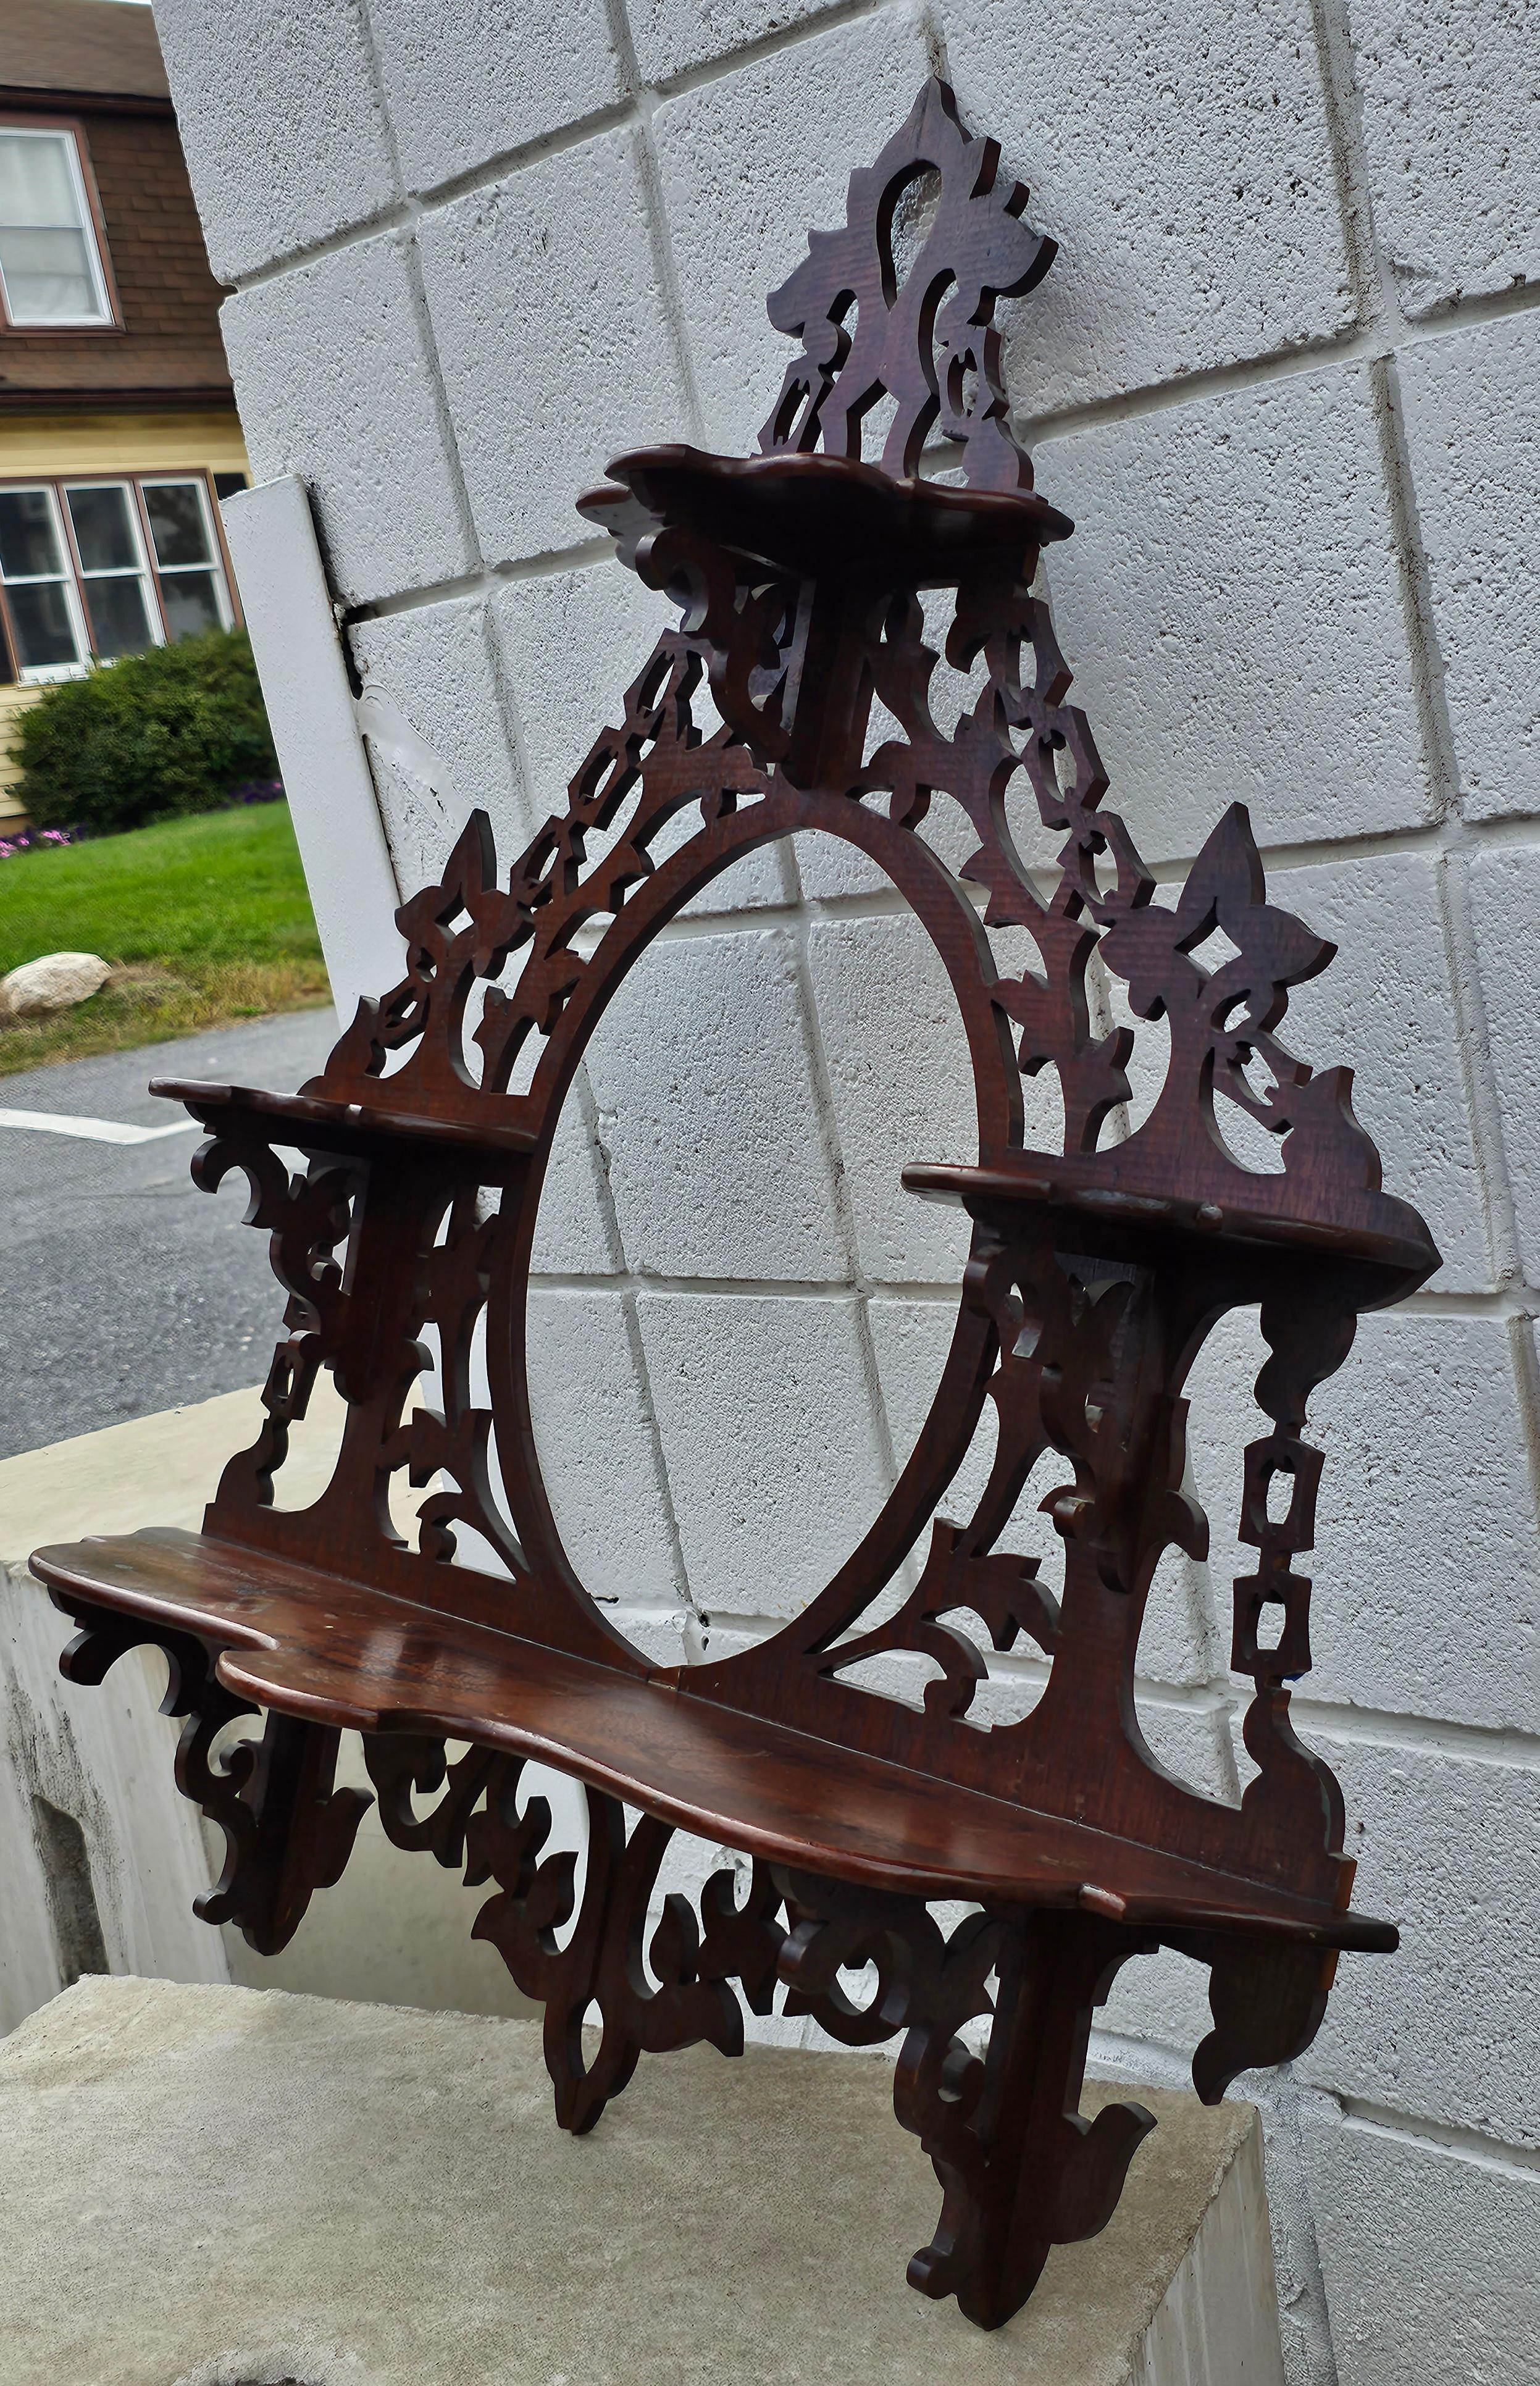 An early 20th Century,  Very fine Victorian Mahogany Fretwork Three Tier Wall Shelf in very good antique condition. Measures 30.75